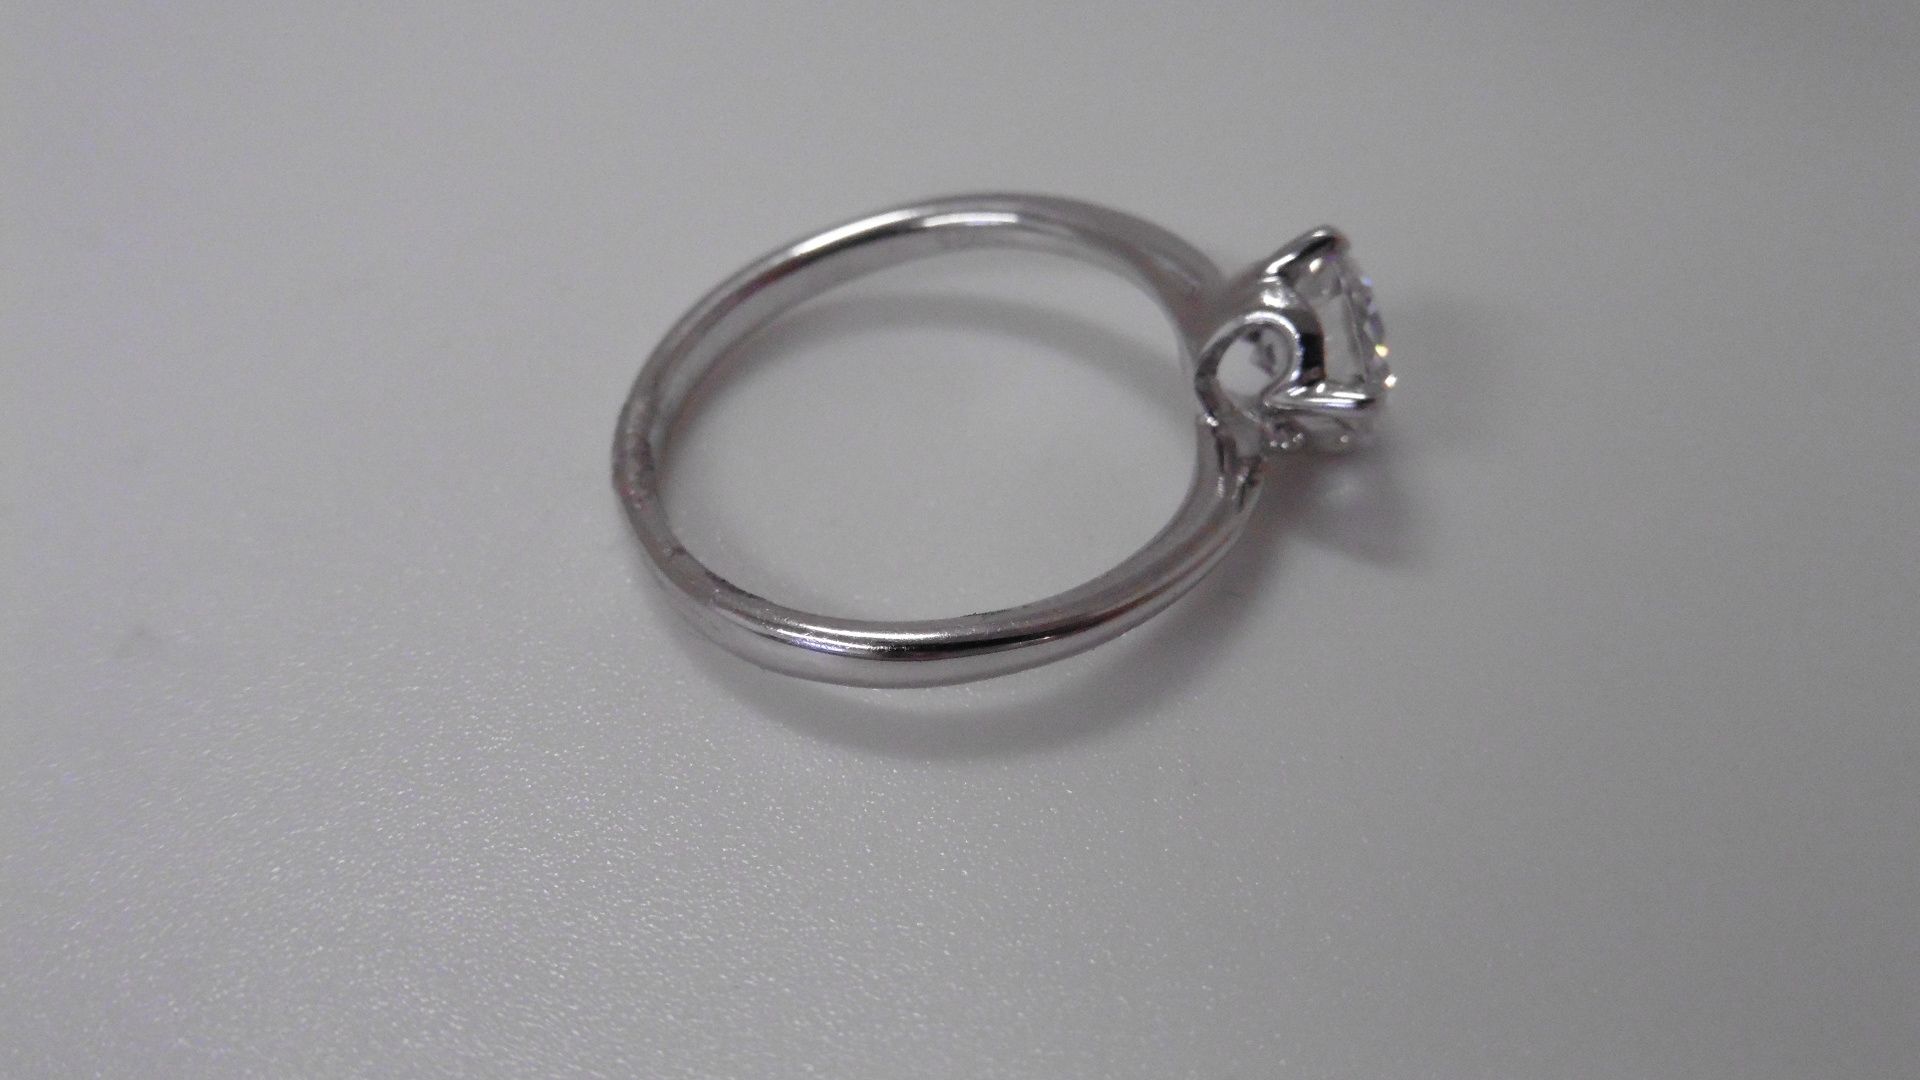 0.70ct diamond solitaire ring set in platinum. I colour, I1 clarity. 4 claw setting on a slight - Image 3 of 3